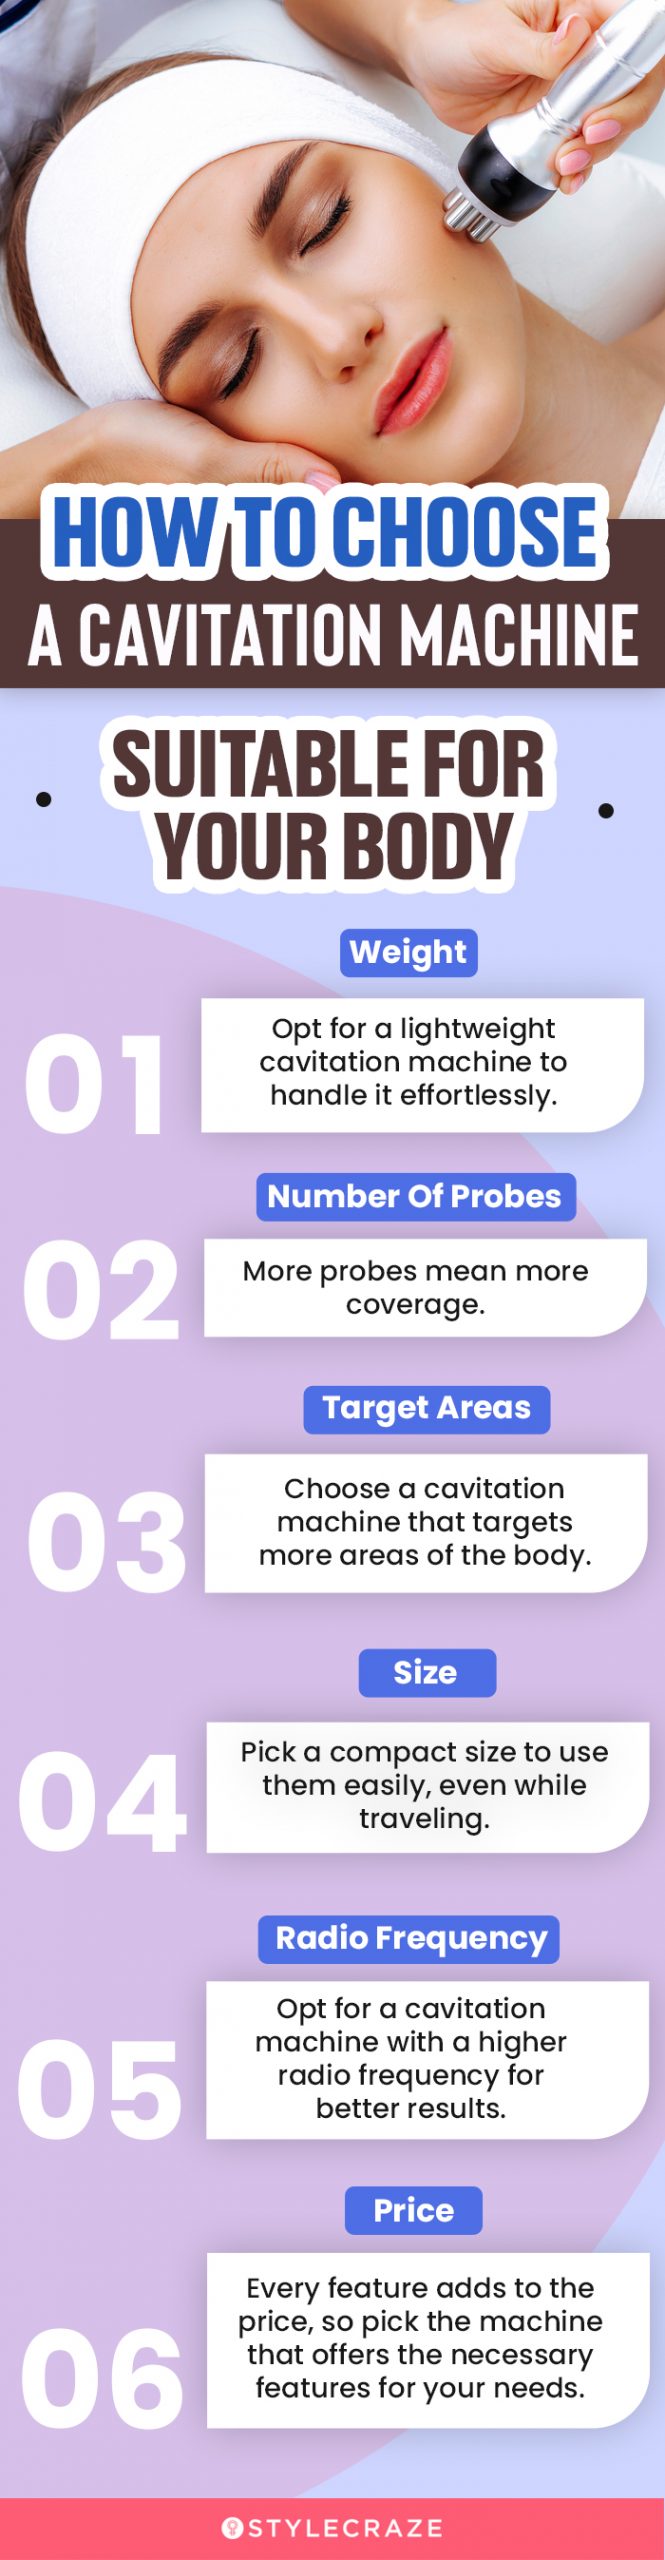 How To Choose A Cavitation Machine Suitable For Your Body